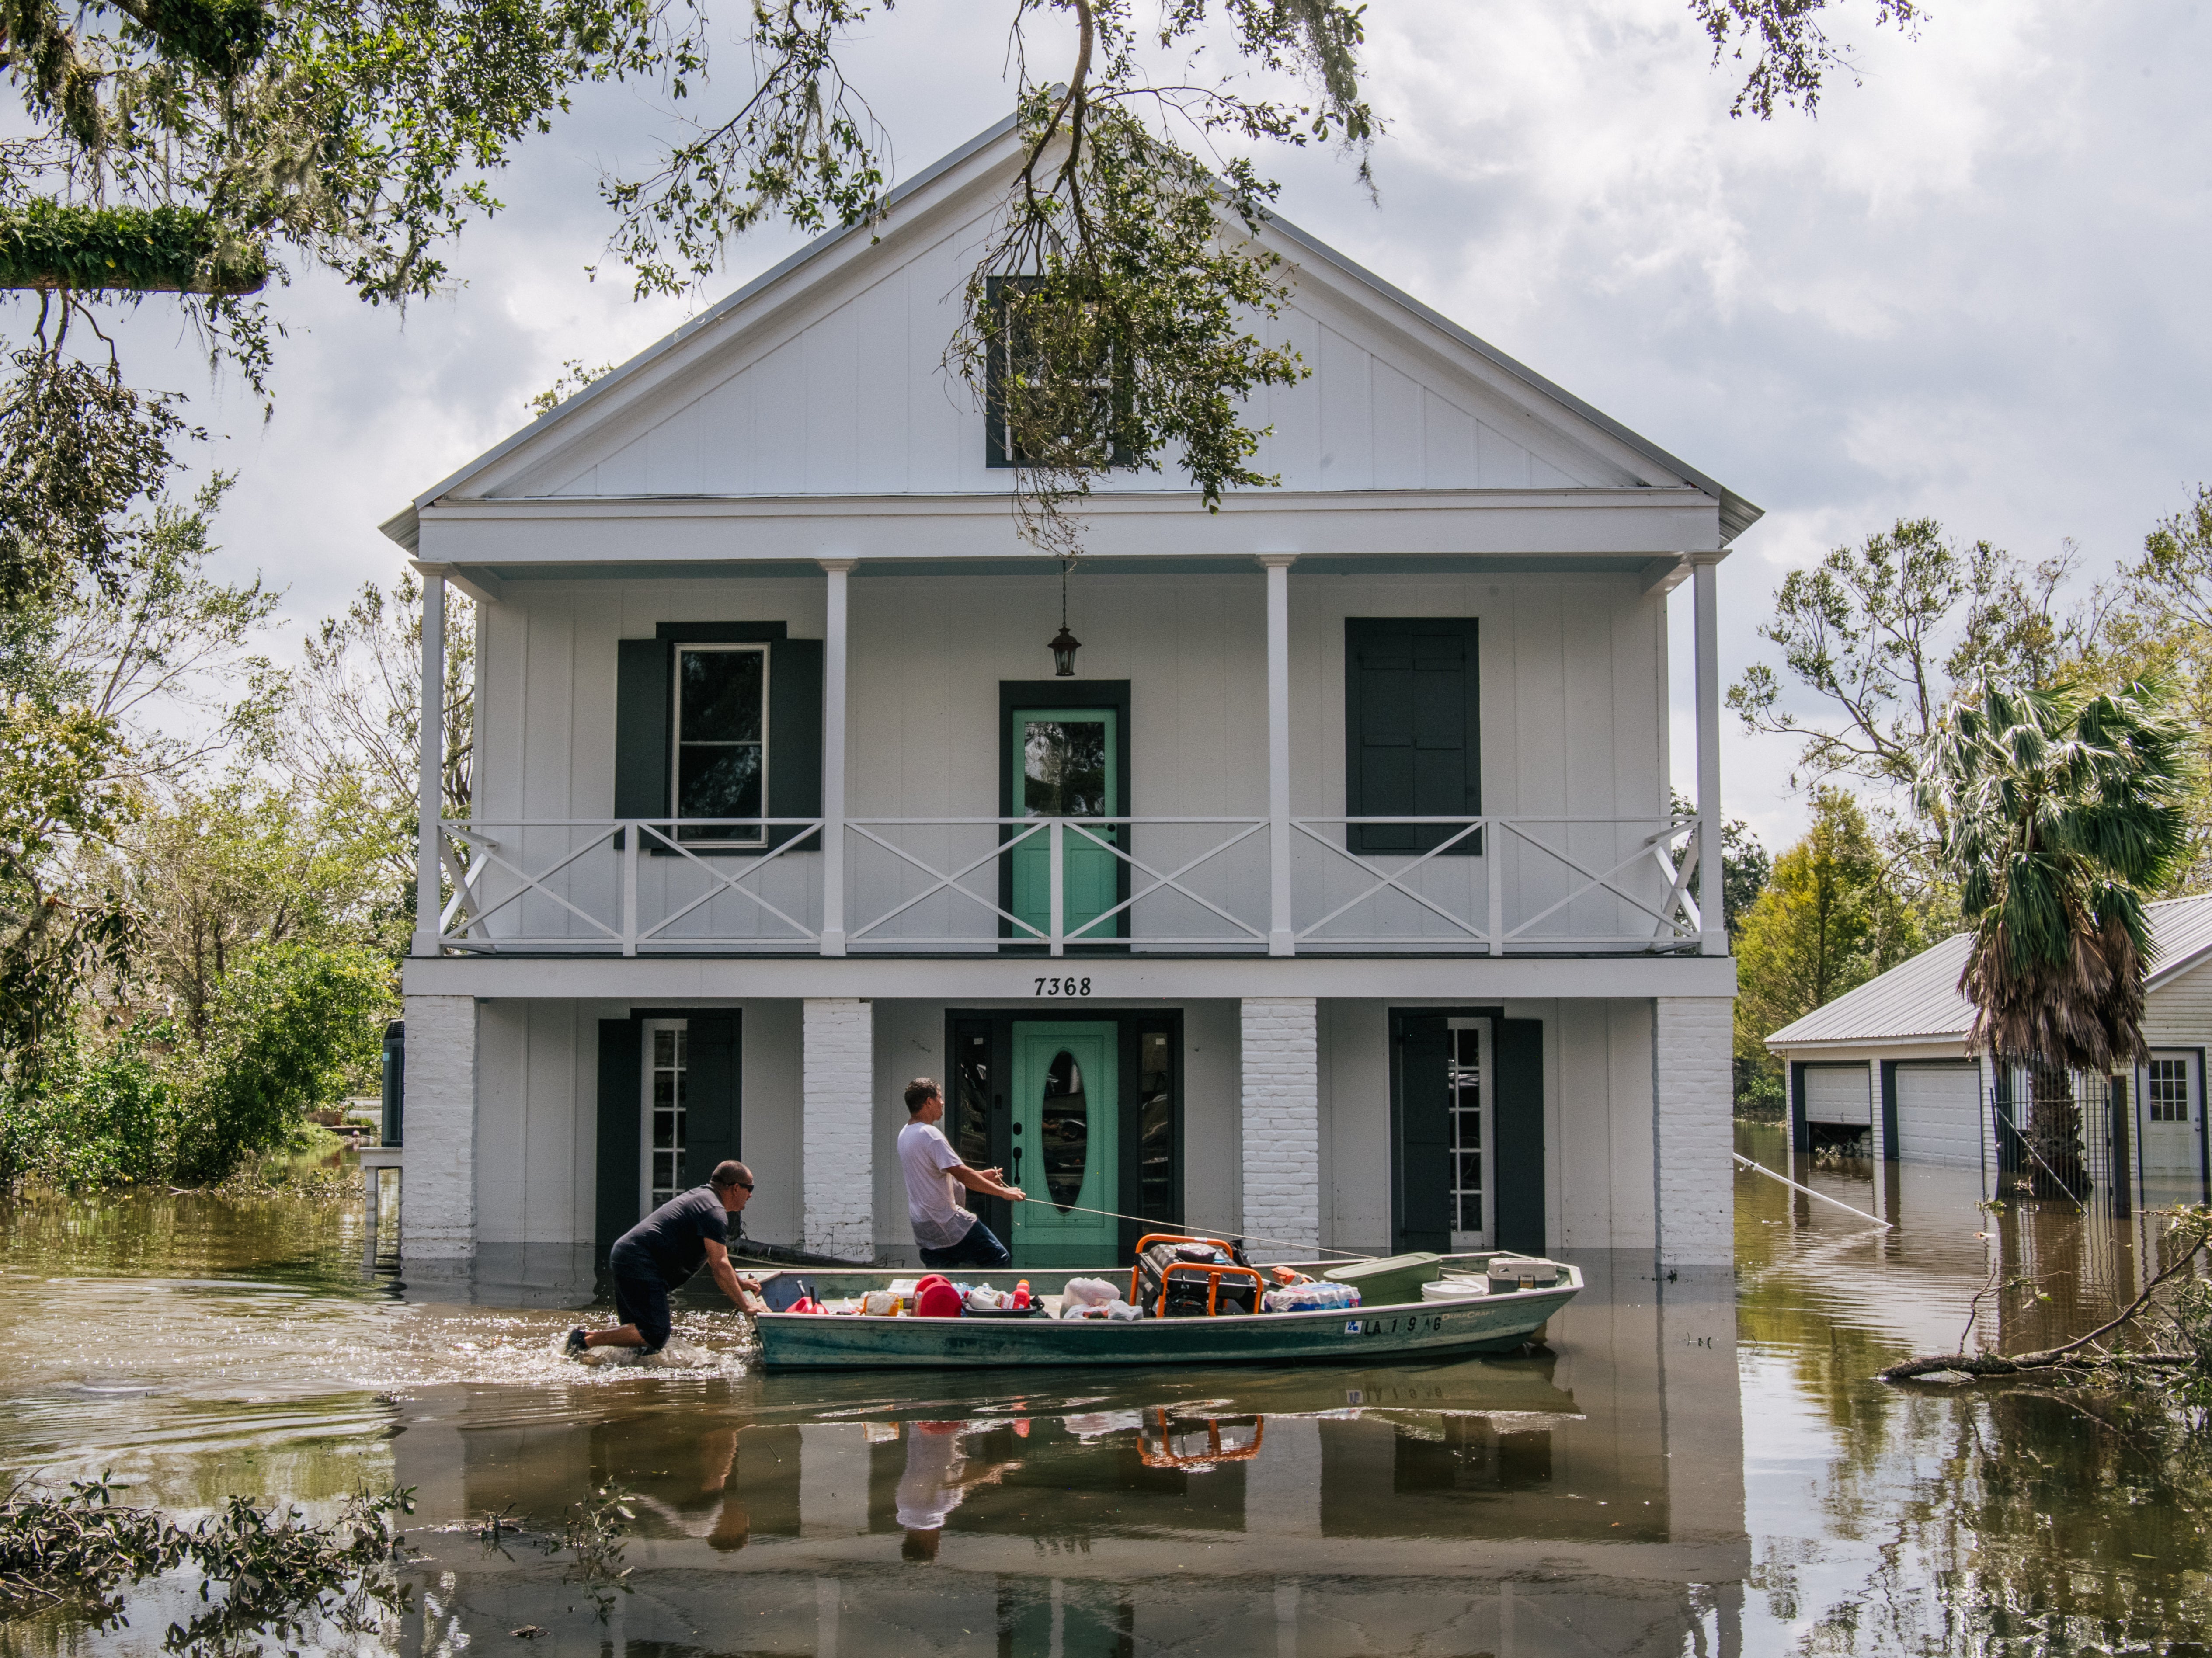 People wade through water on August 31 in Barataria, Louisiana. Hurricane Ida made landfall as a Category-4 storm in Louisiana and brought flooding and wind damage to the Gulf Coast